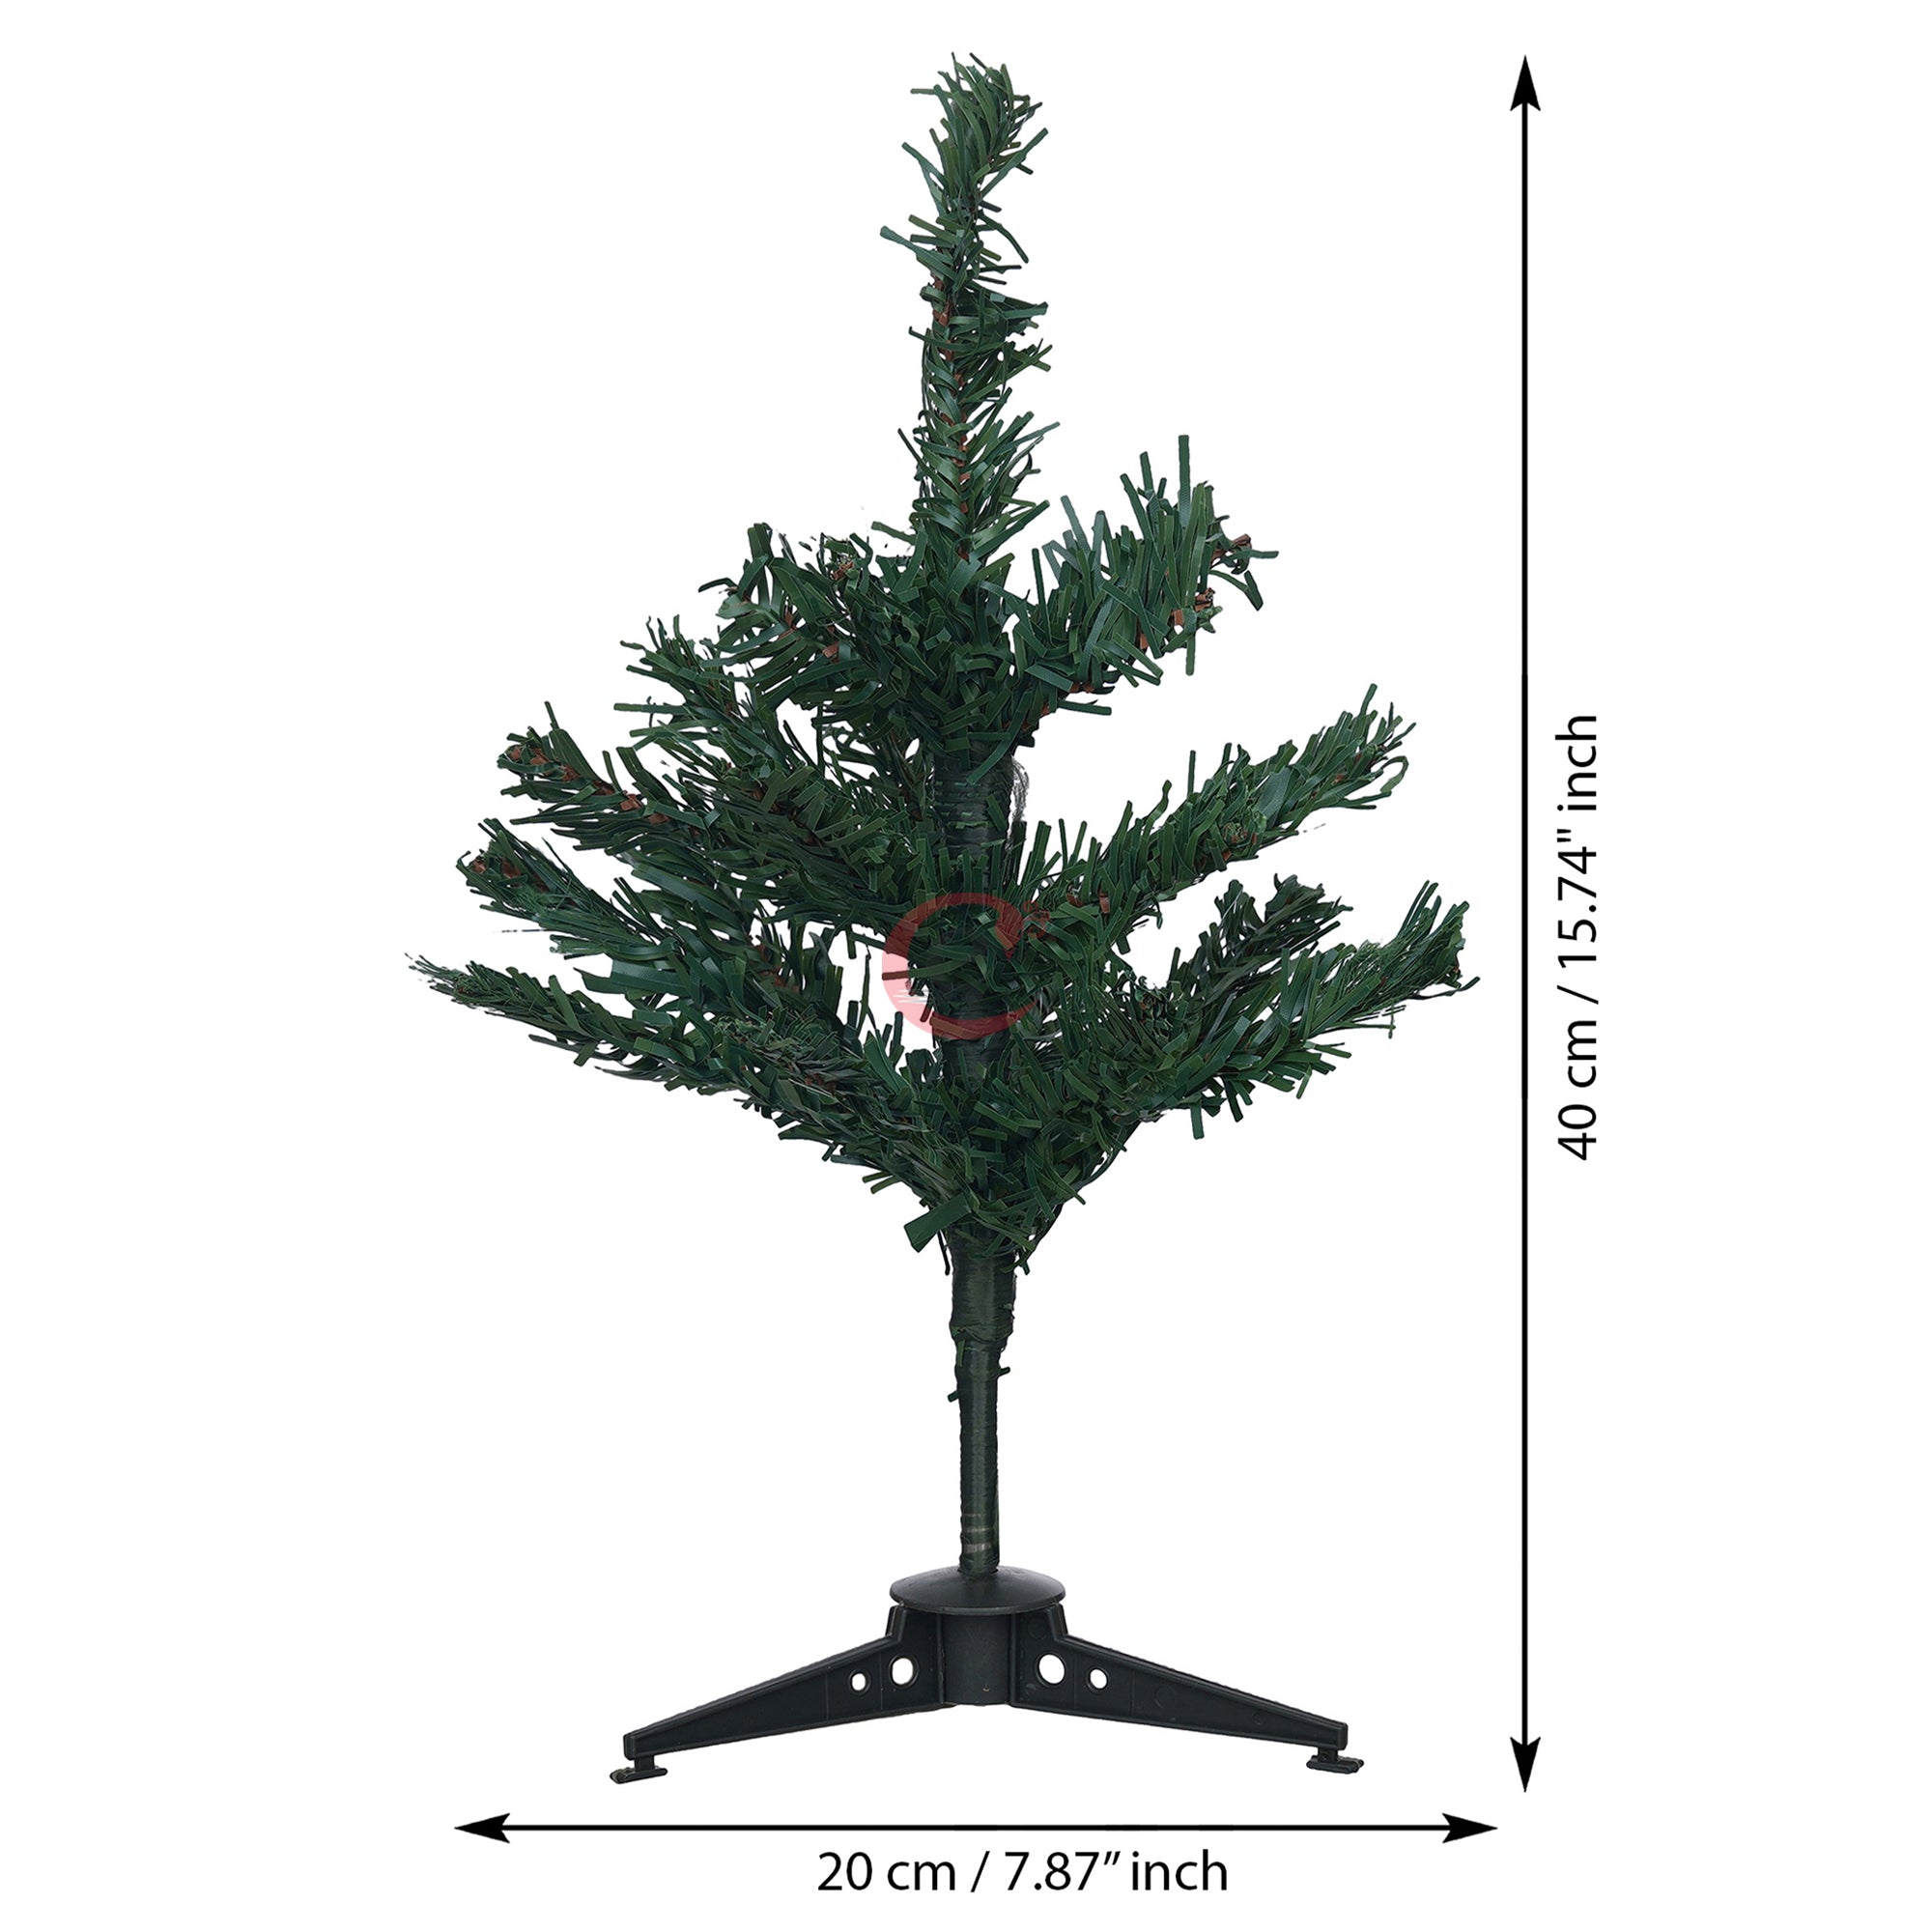 eCraftIndia 1 Feet Green Artificial Christmas Tree Xmas Pine Tree with Stand and 40 Christmas Decoration Ornaments Props - Merry Christmas Decoration Item for Home, Office, and Church 3